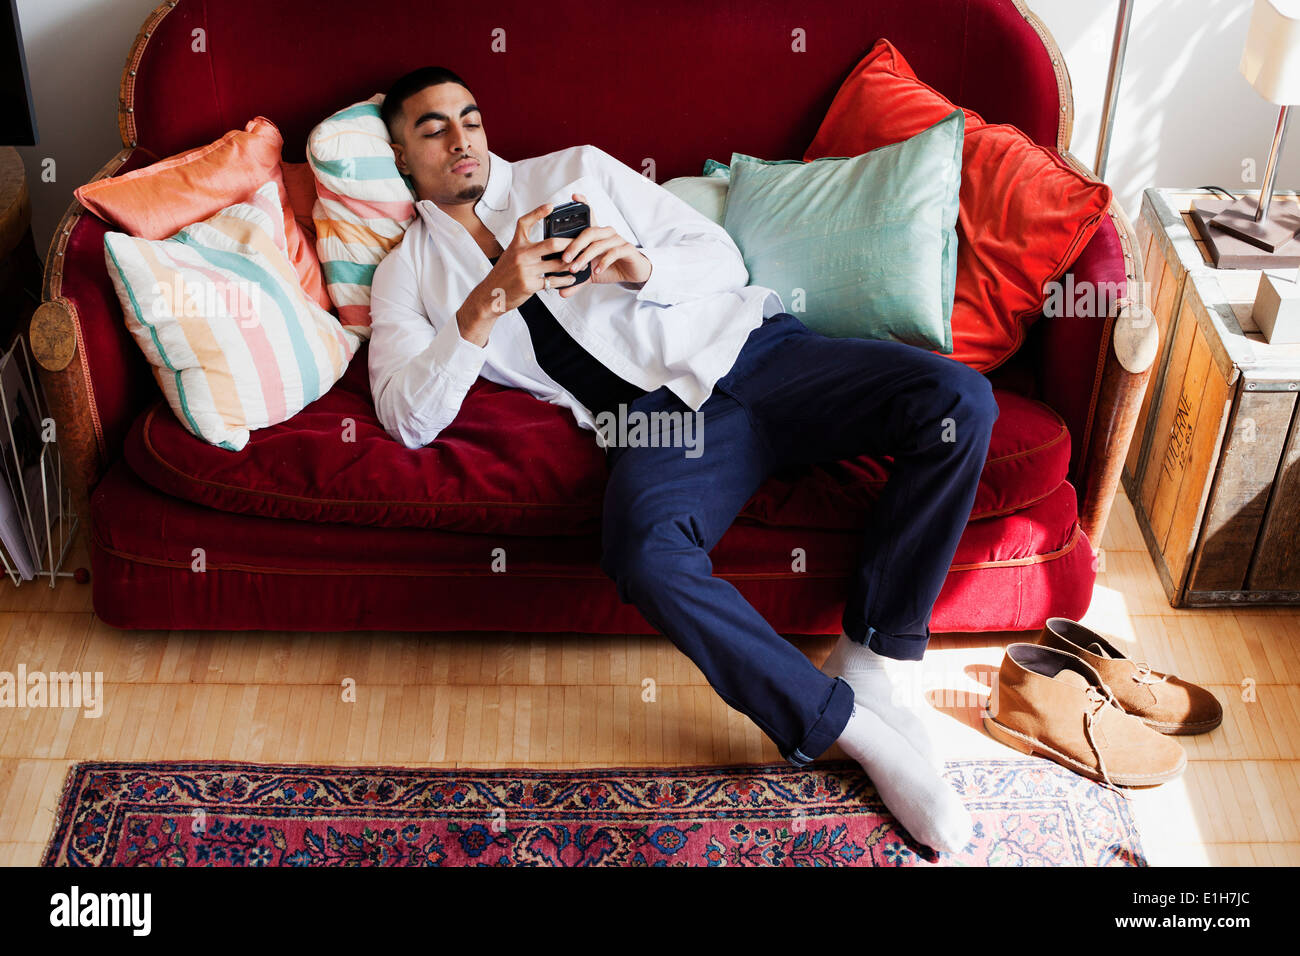 Young man lying on sofa, using smartphone Banque D'Images